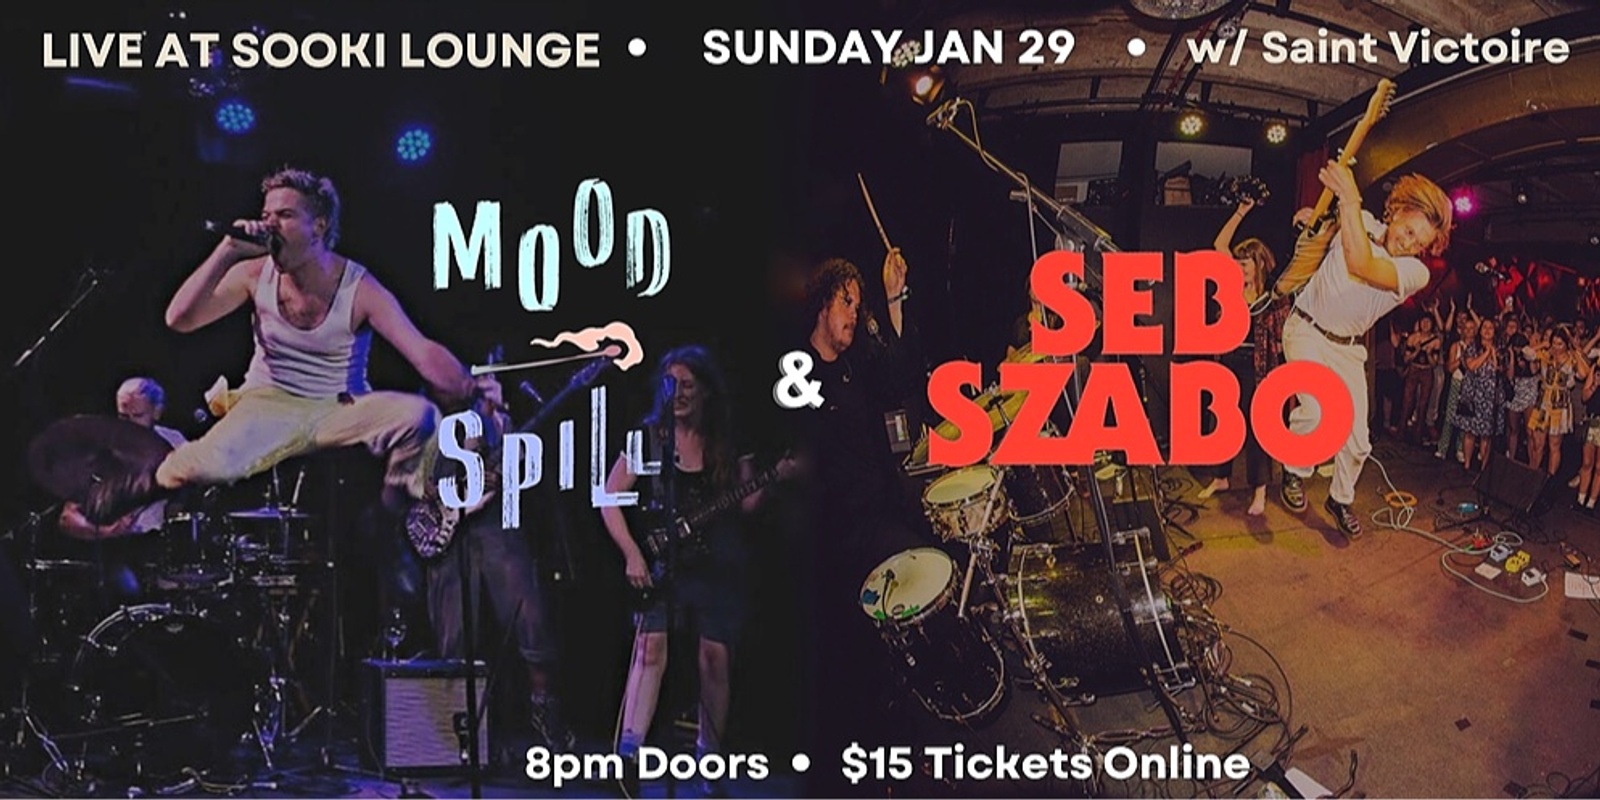 Banner image for Seb Szabo and Mood Spill w/ Saint Victoire at Sooki Lounge Sunday Jan 29th